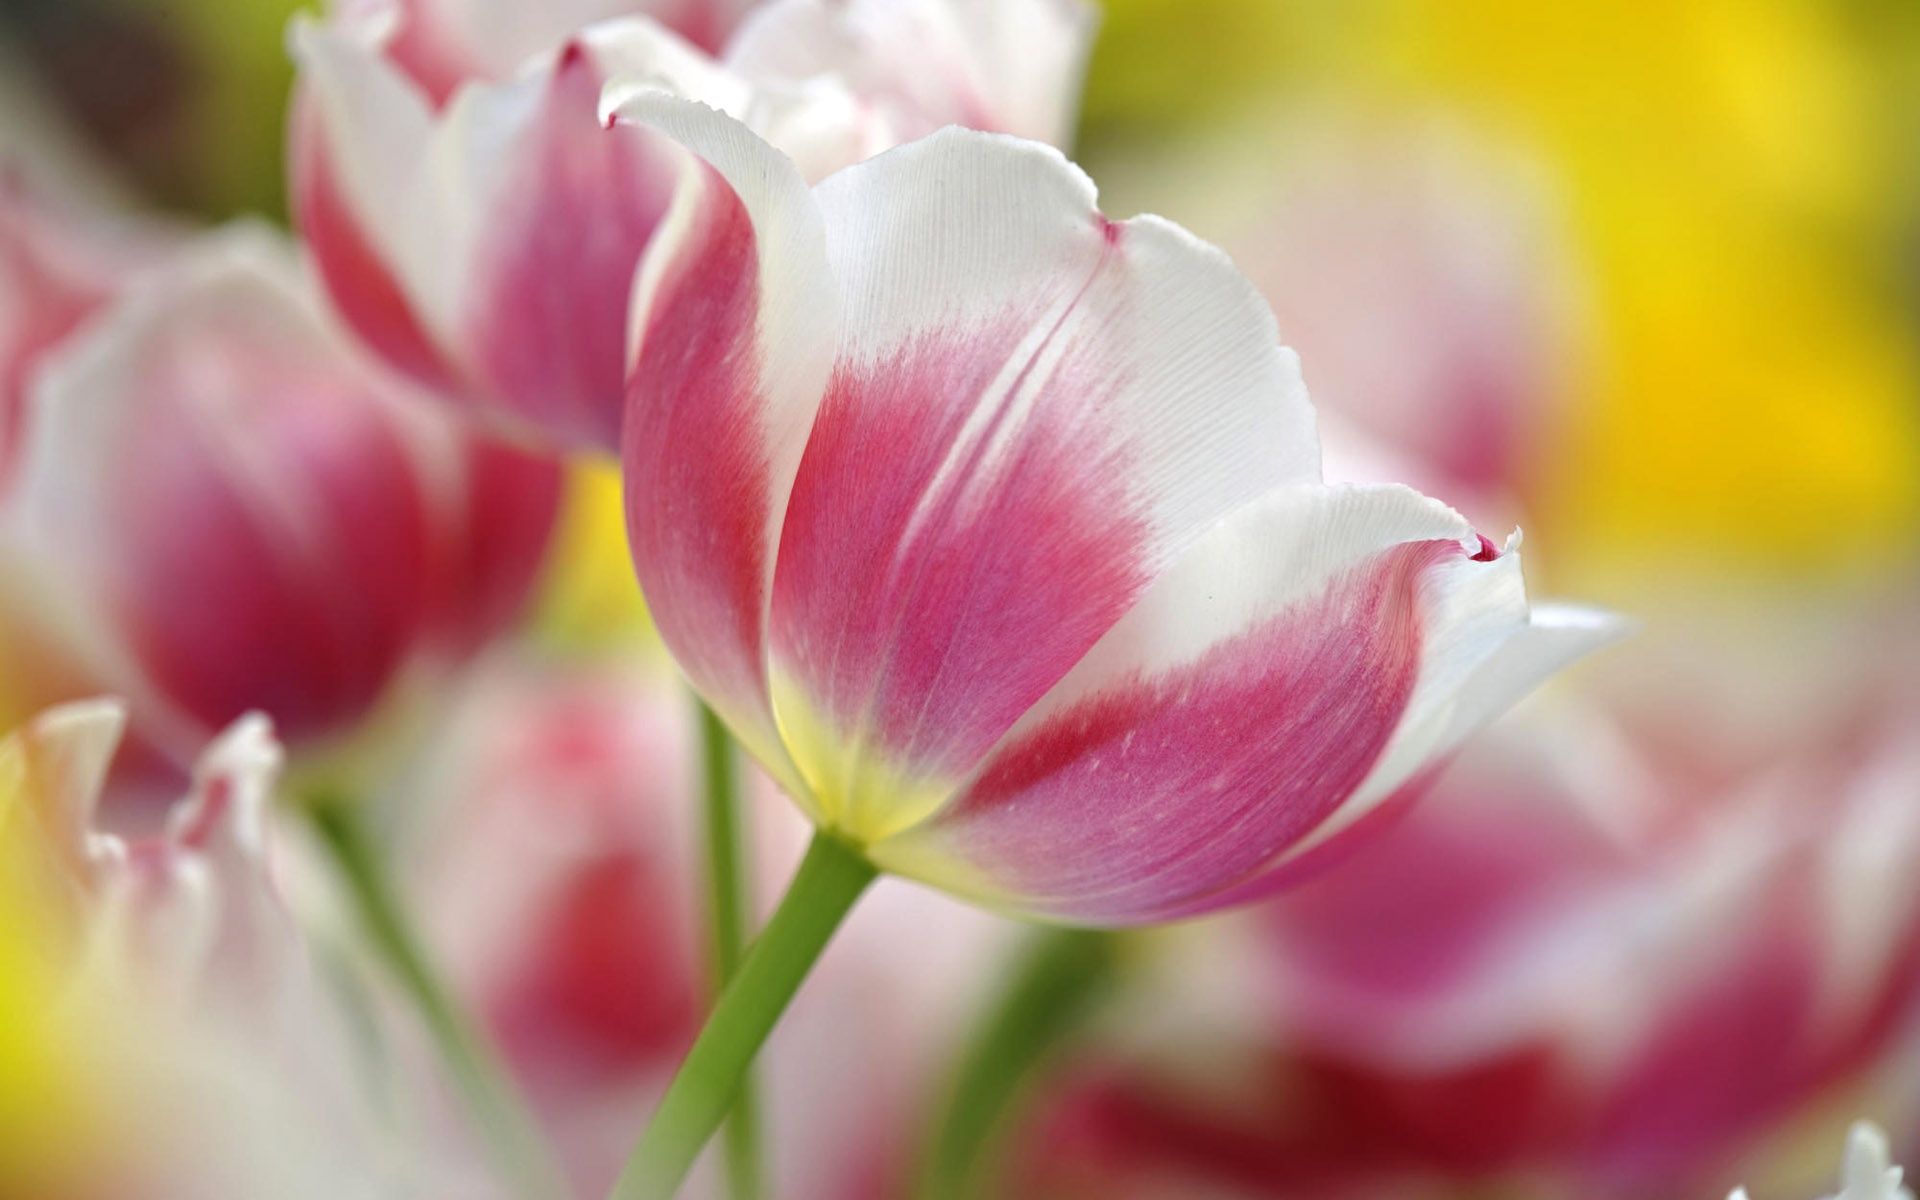 Tulip Wallpapers, Tulip Backgrounds, Tulip Free HD Backgrounds